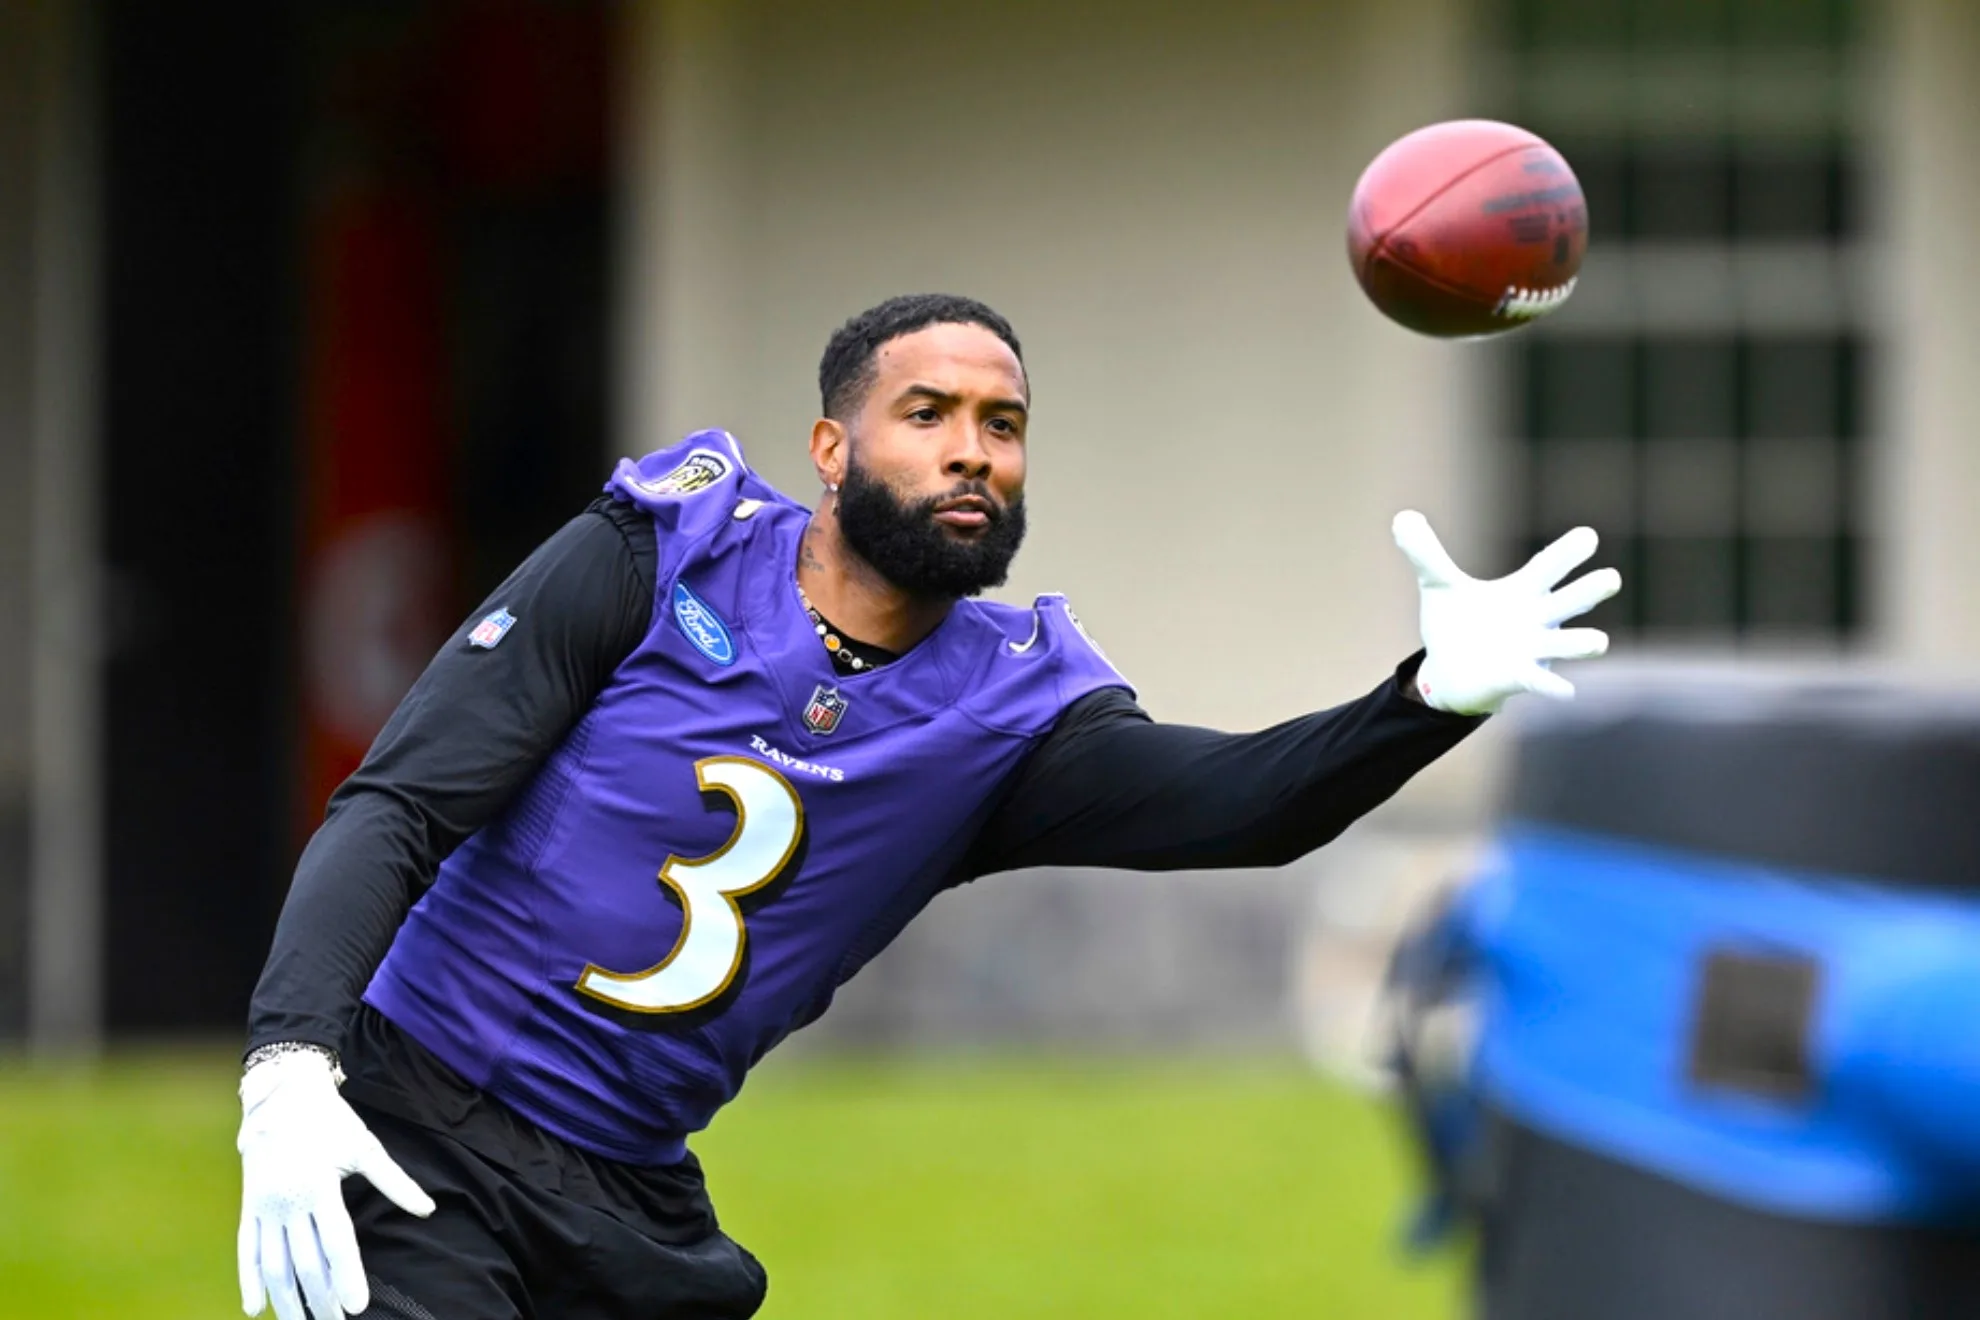 Odell Beckham Jr., "OBJ," works out as a member of the Baltimore Ravens last season. Miami coach Mike McDaniel has said a recent free agent visit with OBJ went well, and the Dolphins have made him an offer. (Photo courtesy of MARCA.COM)